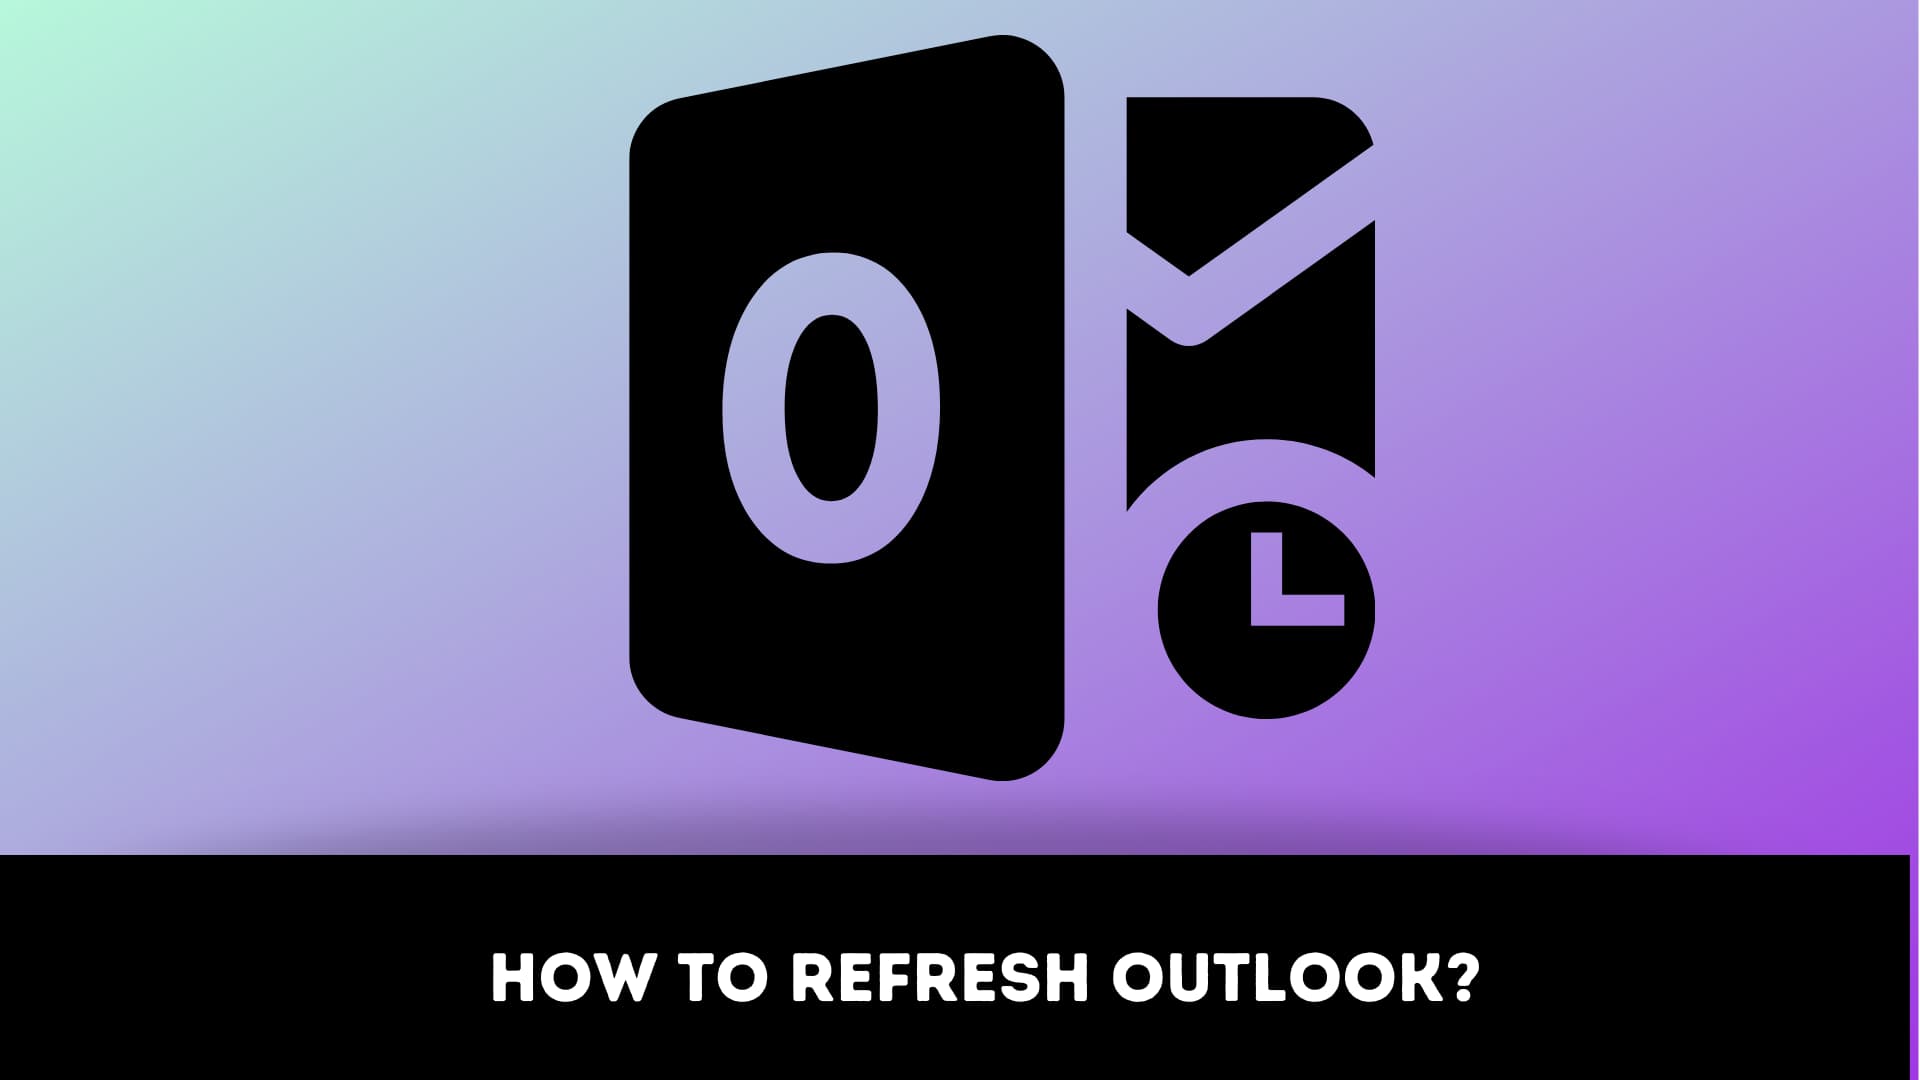 How To Refresh Outlook?